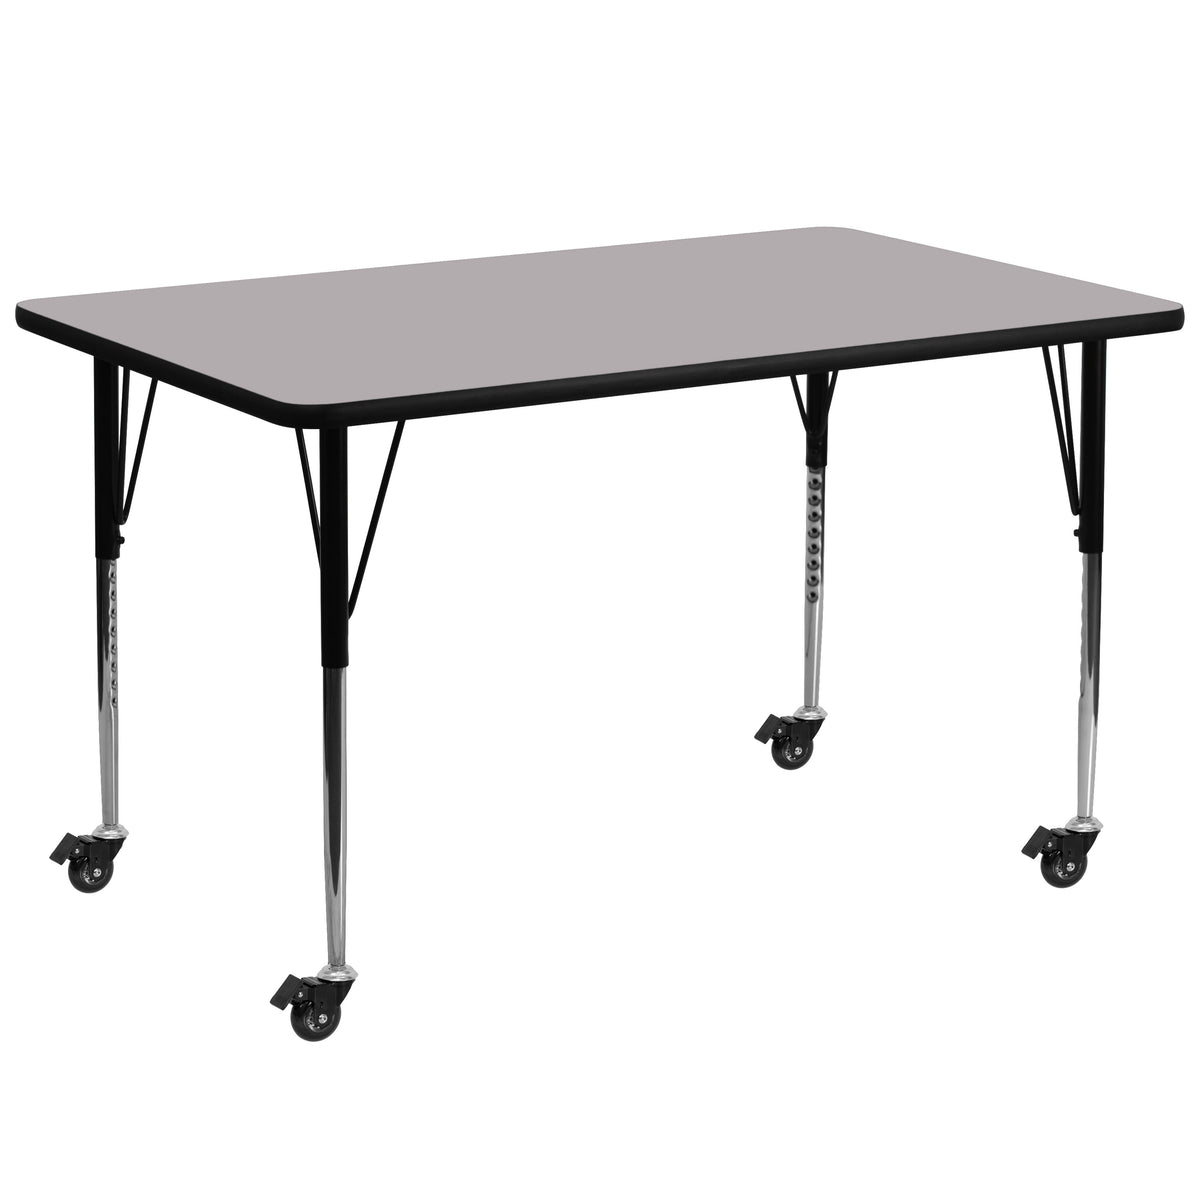 Gray |#| Mobile 30inchW x 72inchL Rectangular Grey Thermal Laminate Adjustable Activity Table